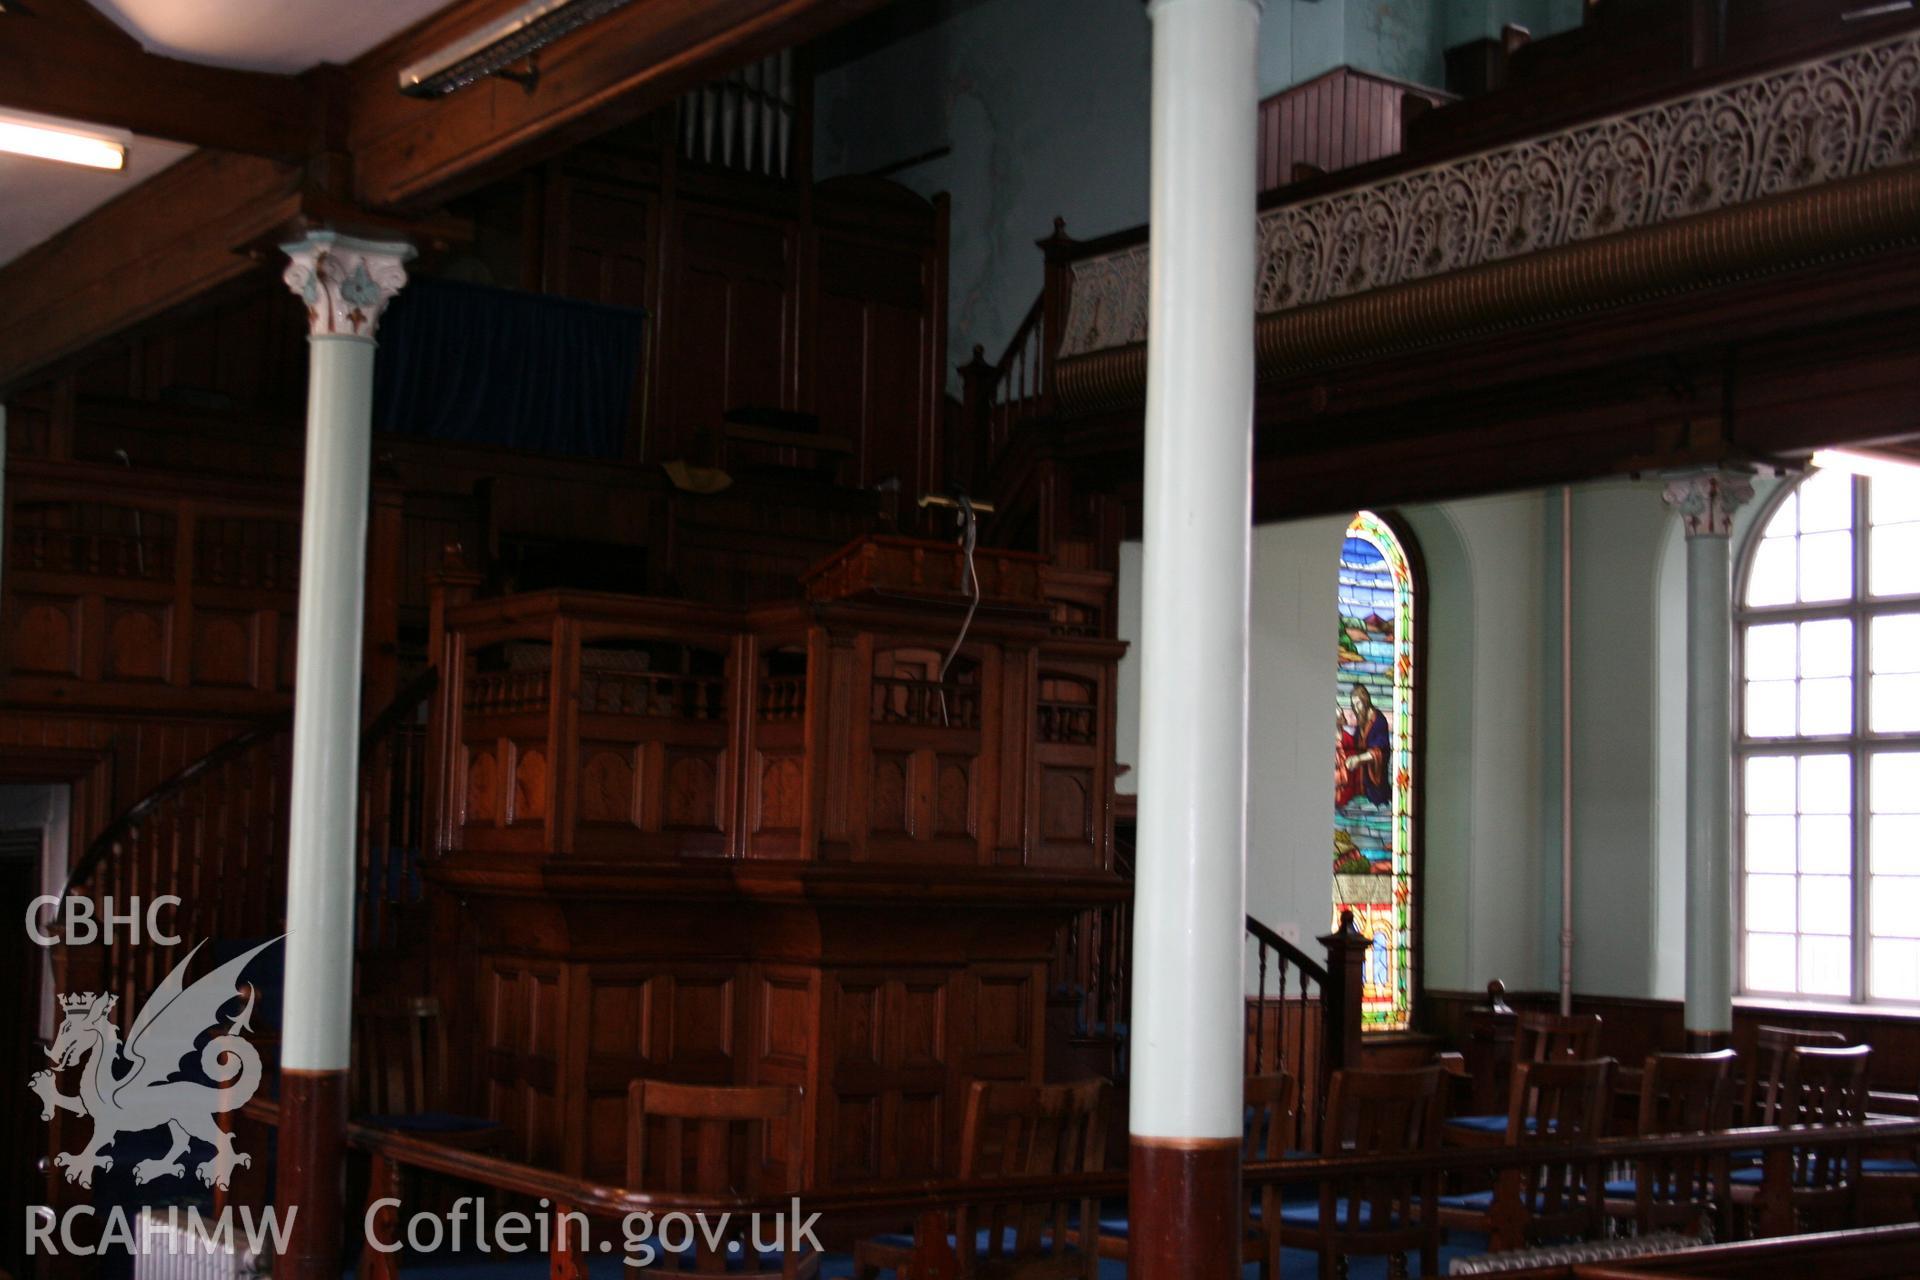 Hanbury Road baptist chapel, Bargoed, digital colour photograph showing interior - stained glass, received in the course of Emergency Recording case ref no RCS2/1/2247.